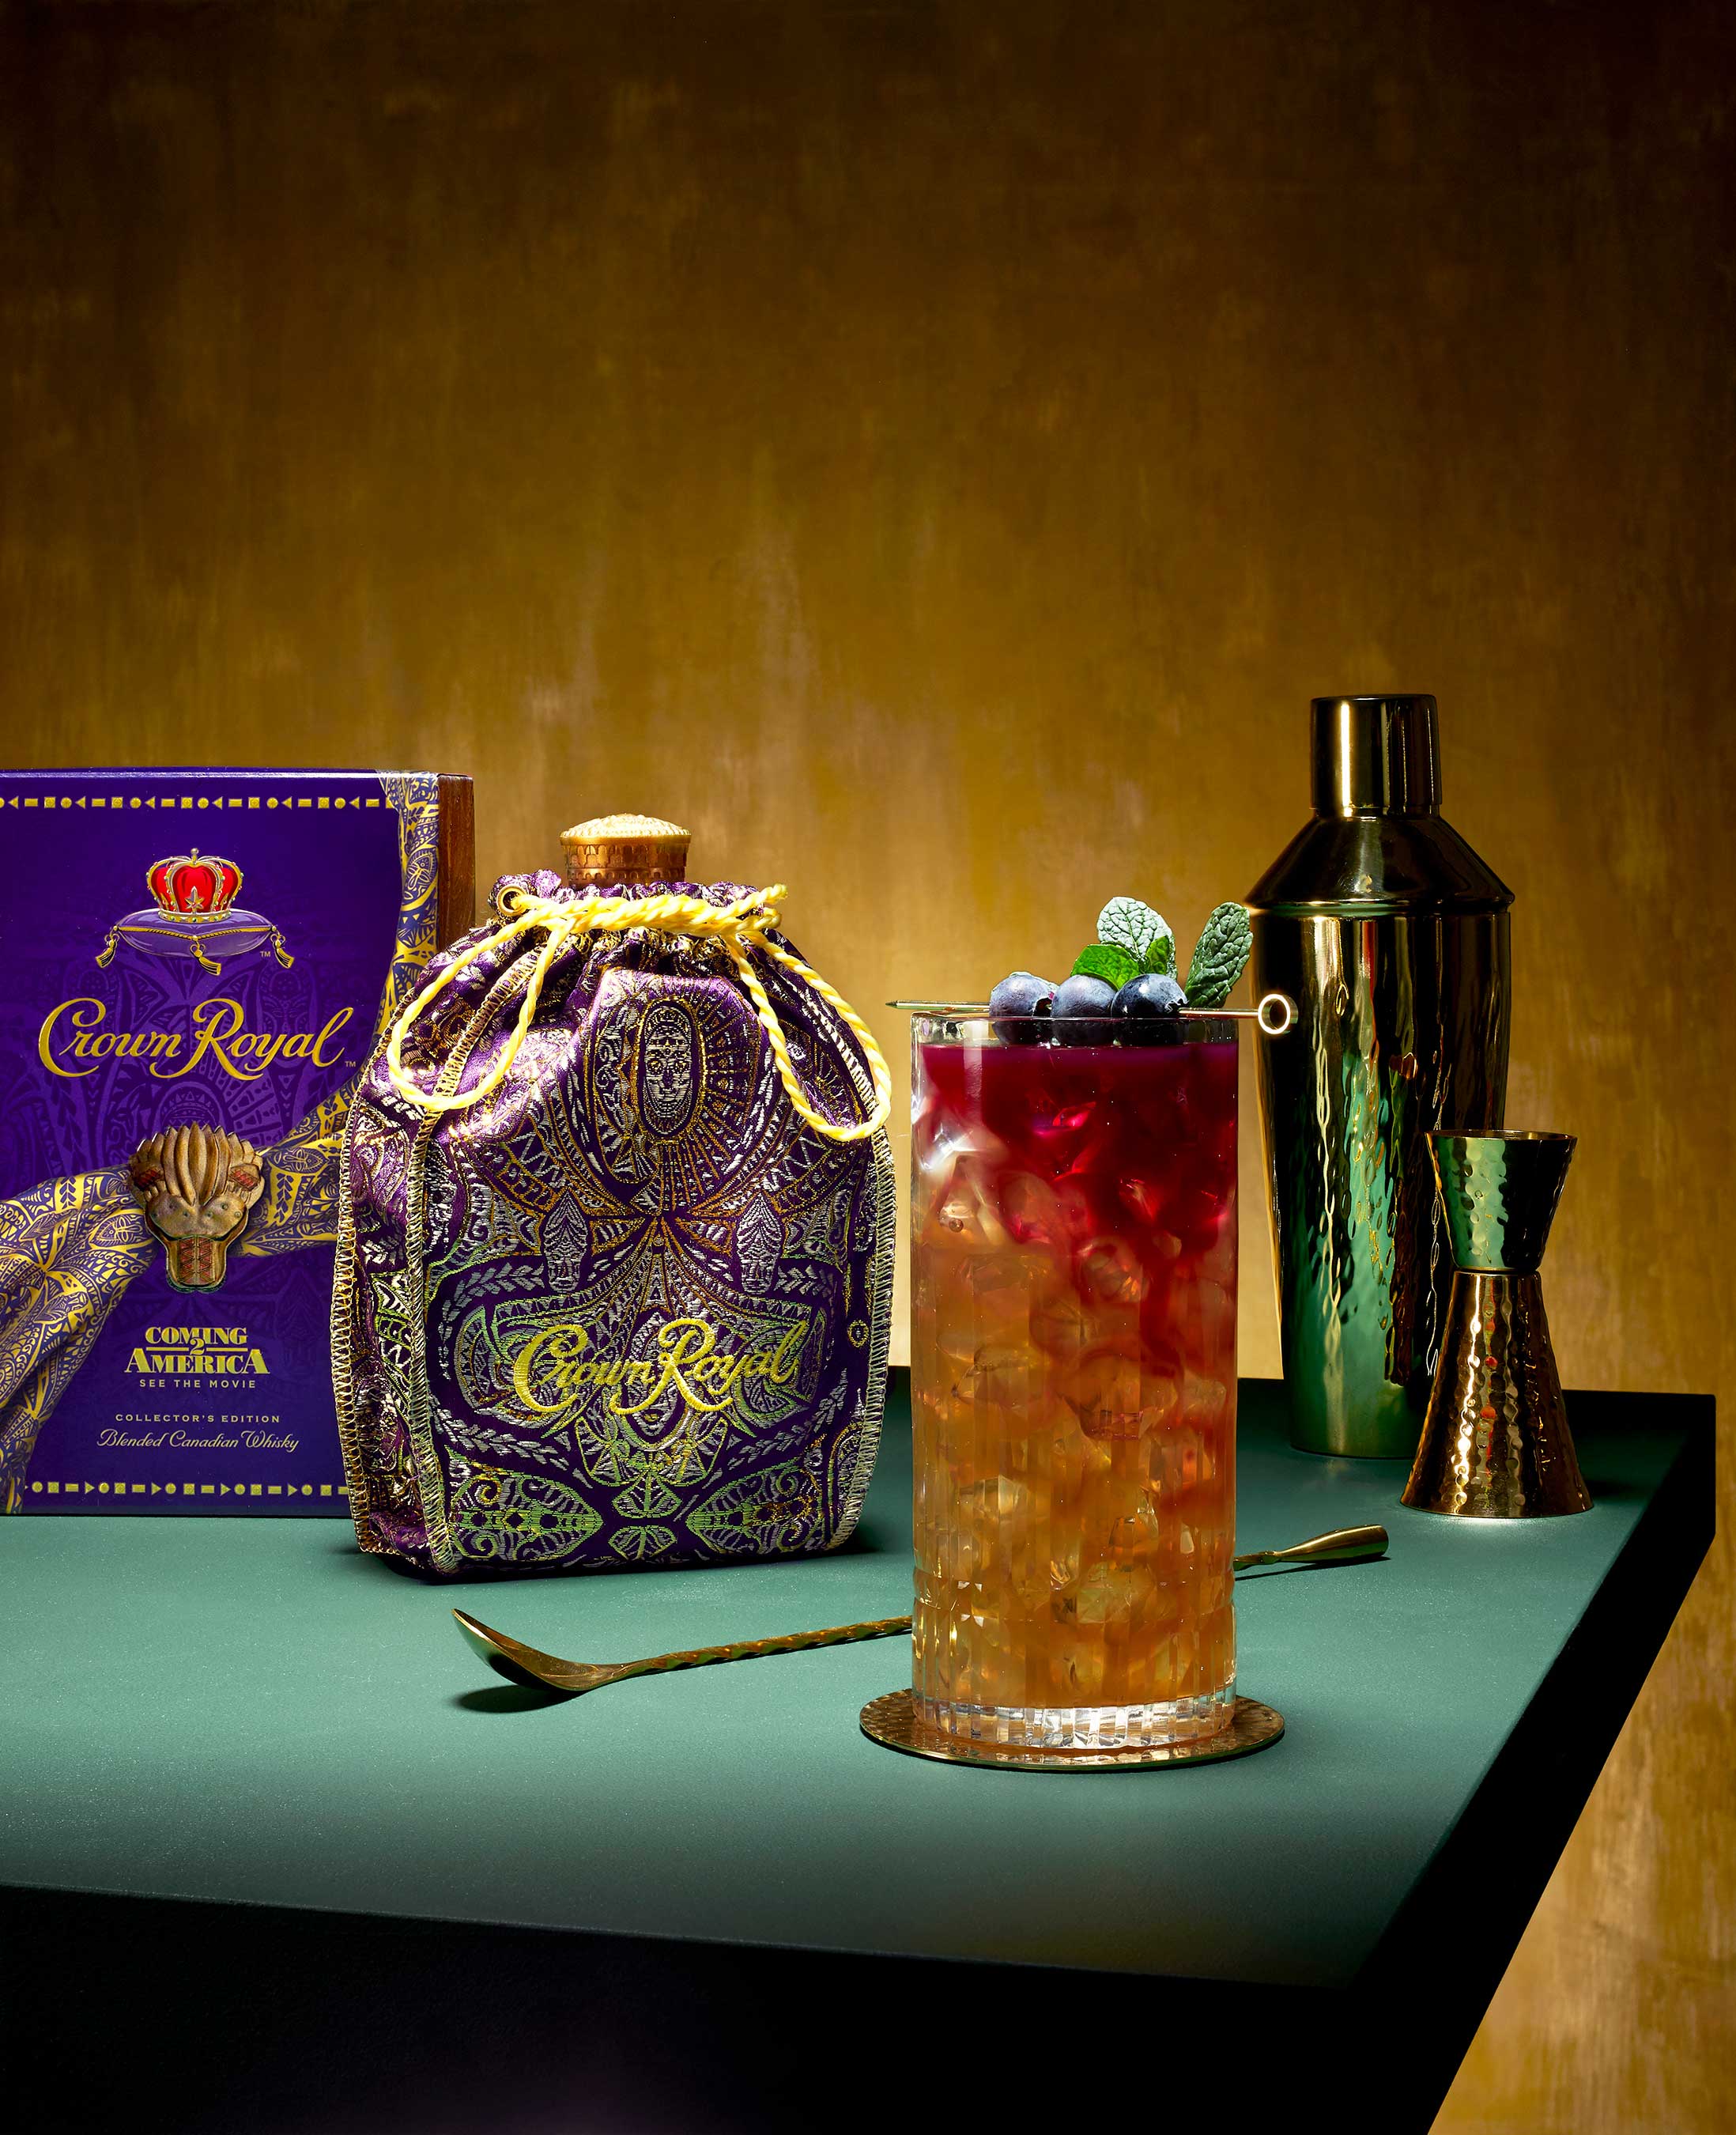 Sip on the delicious Crown Royal Sour Glow cocktail during the Coming 2 America movie premiere on March 5th. Recipe courtesy of Buzzfeed Tasty.